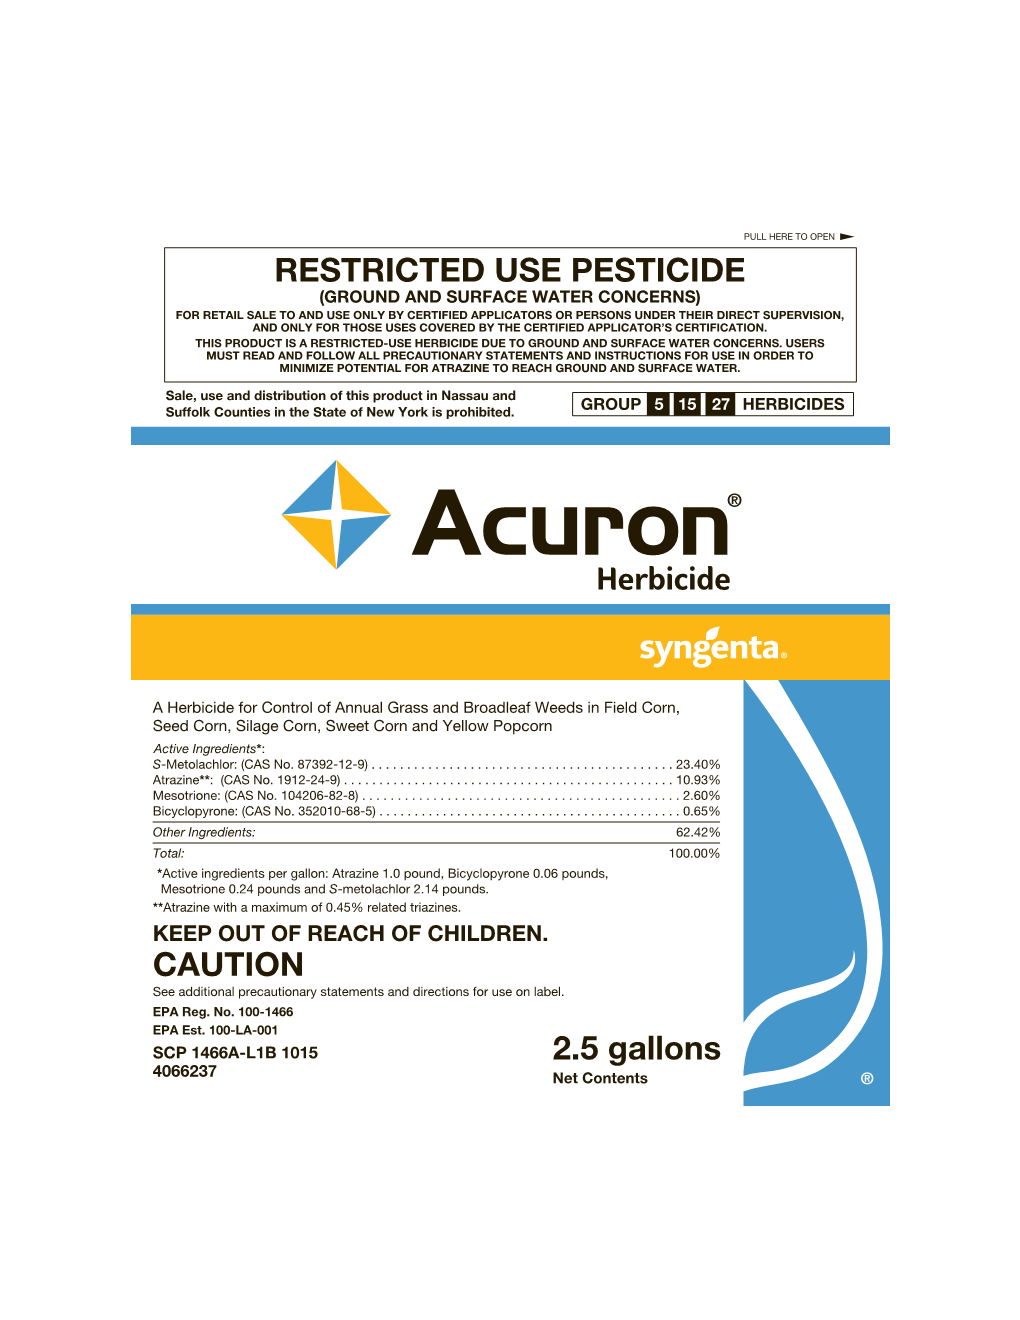 CAUTION 2.5 Gallons RESTRICTED USE PESTICIDE